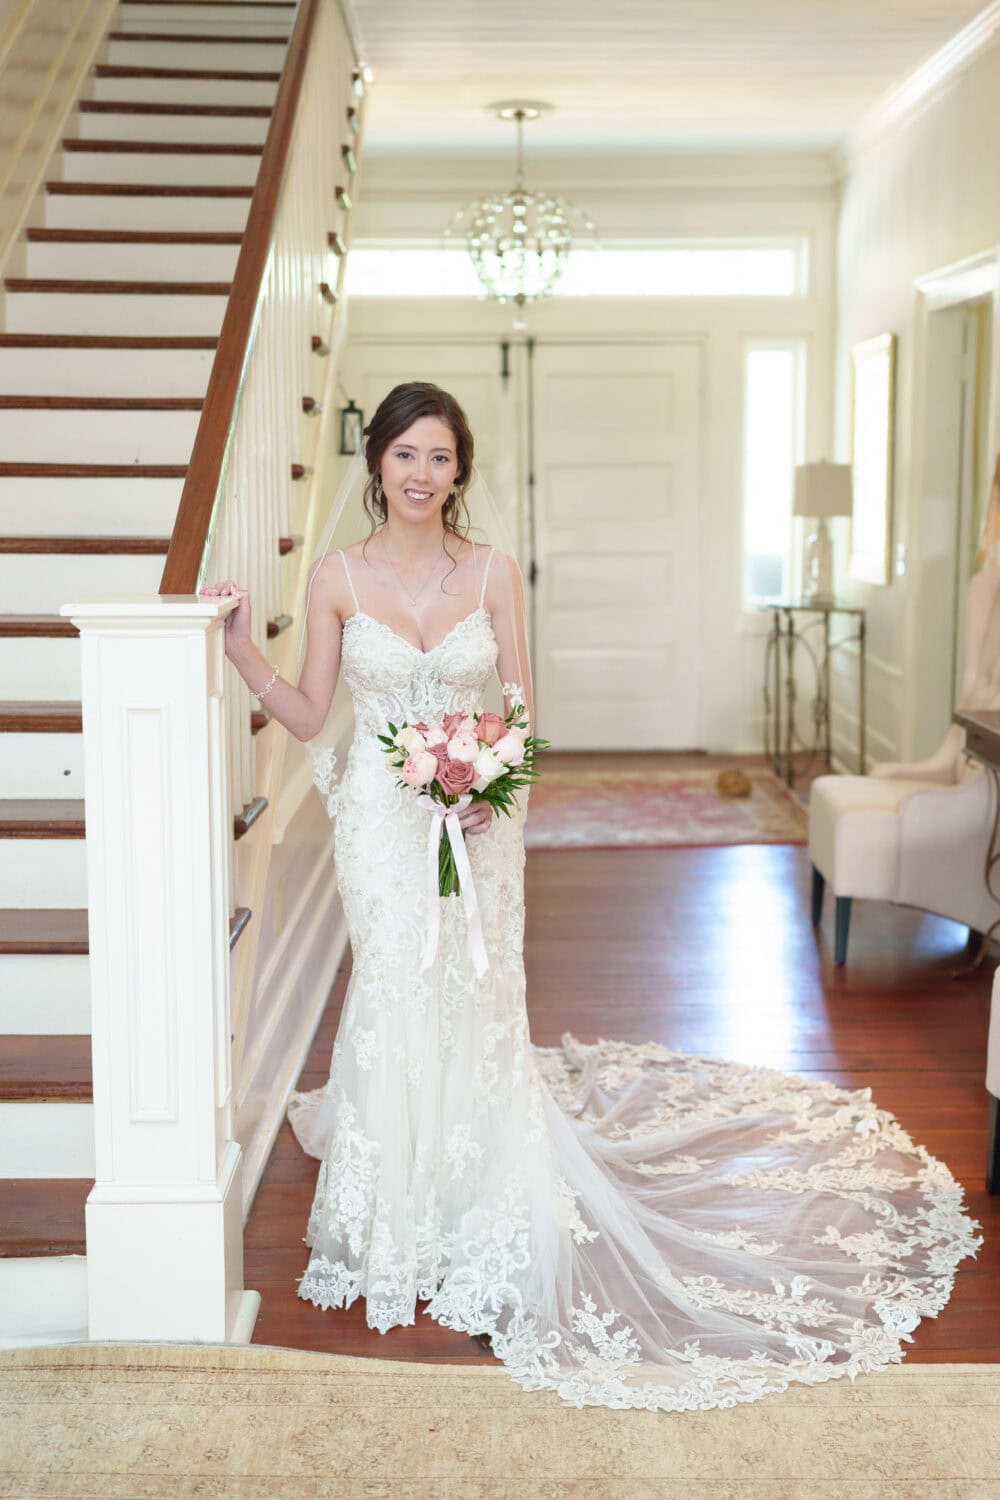 Bride standing in the hallway - Tanglewood Plantation